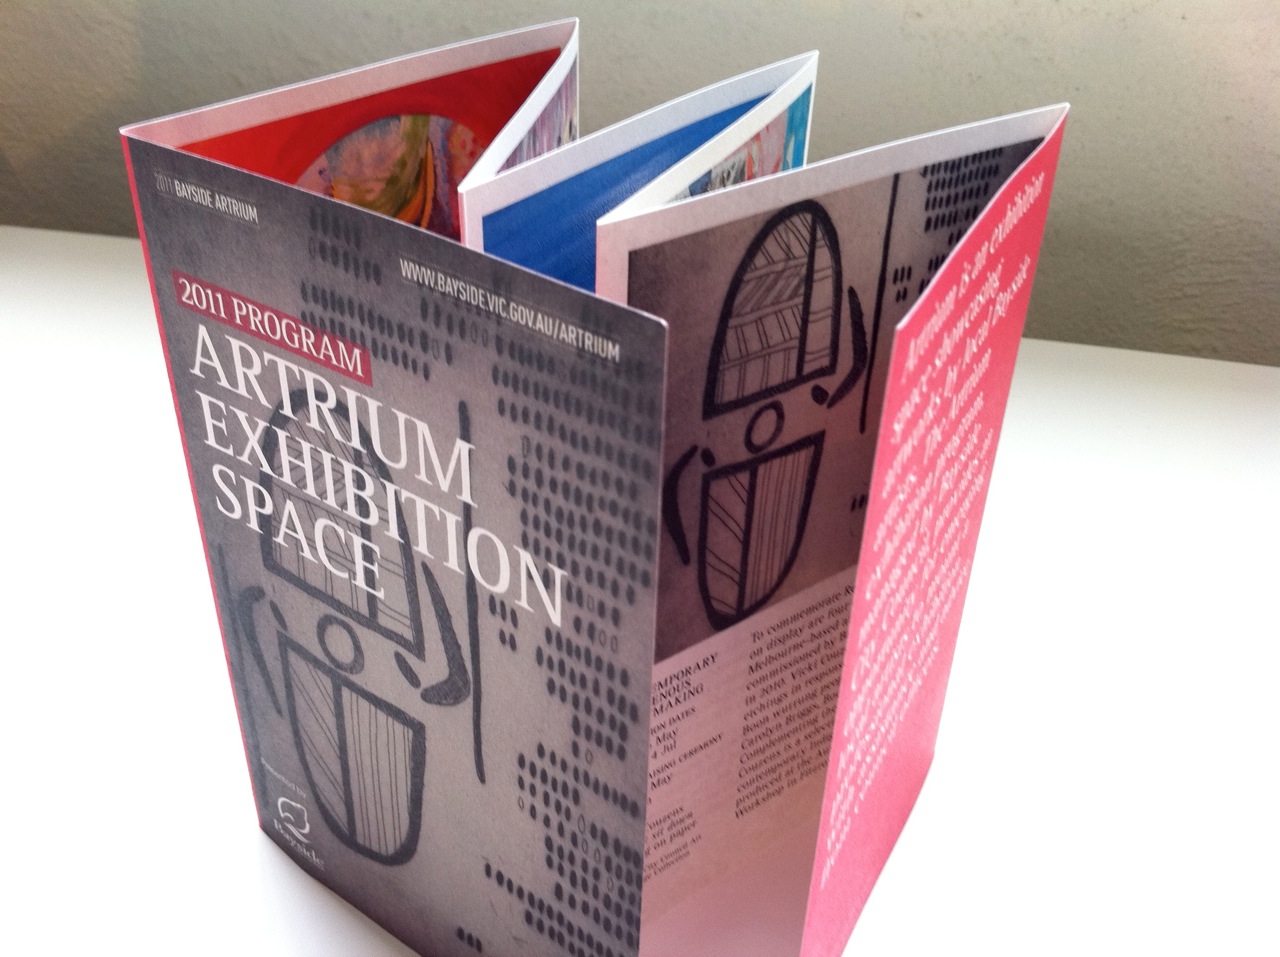 New work: Artrium Exhibition Program for Bayside City Council